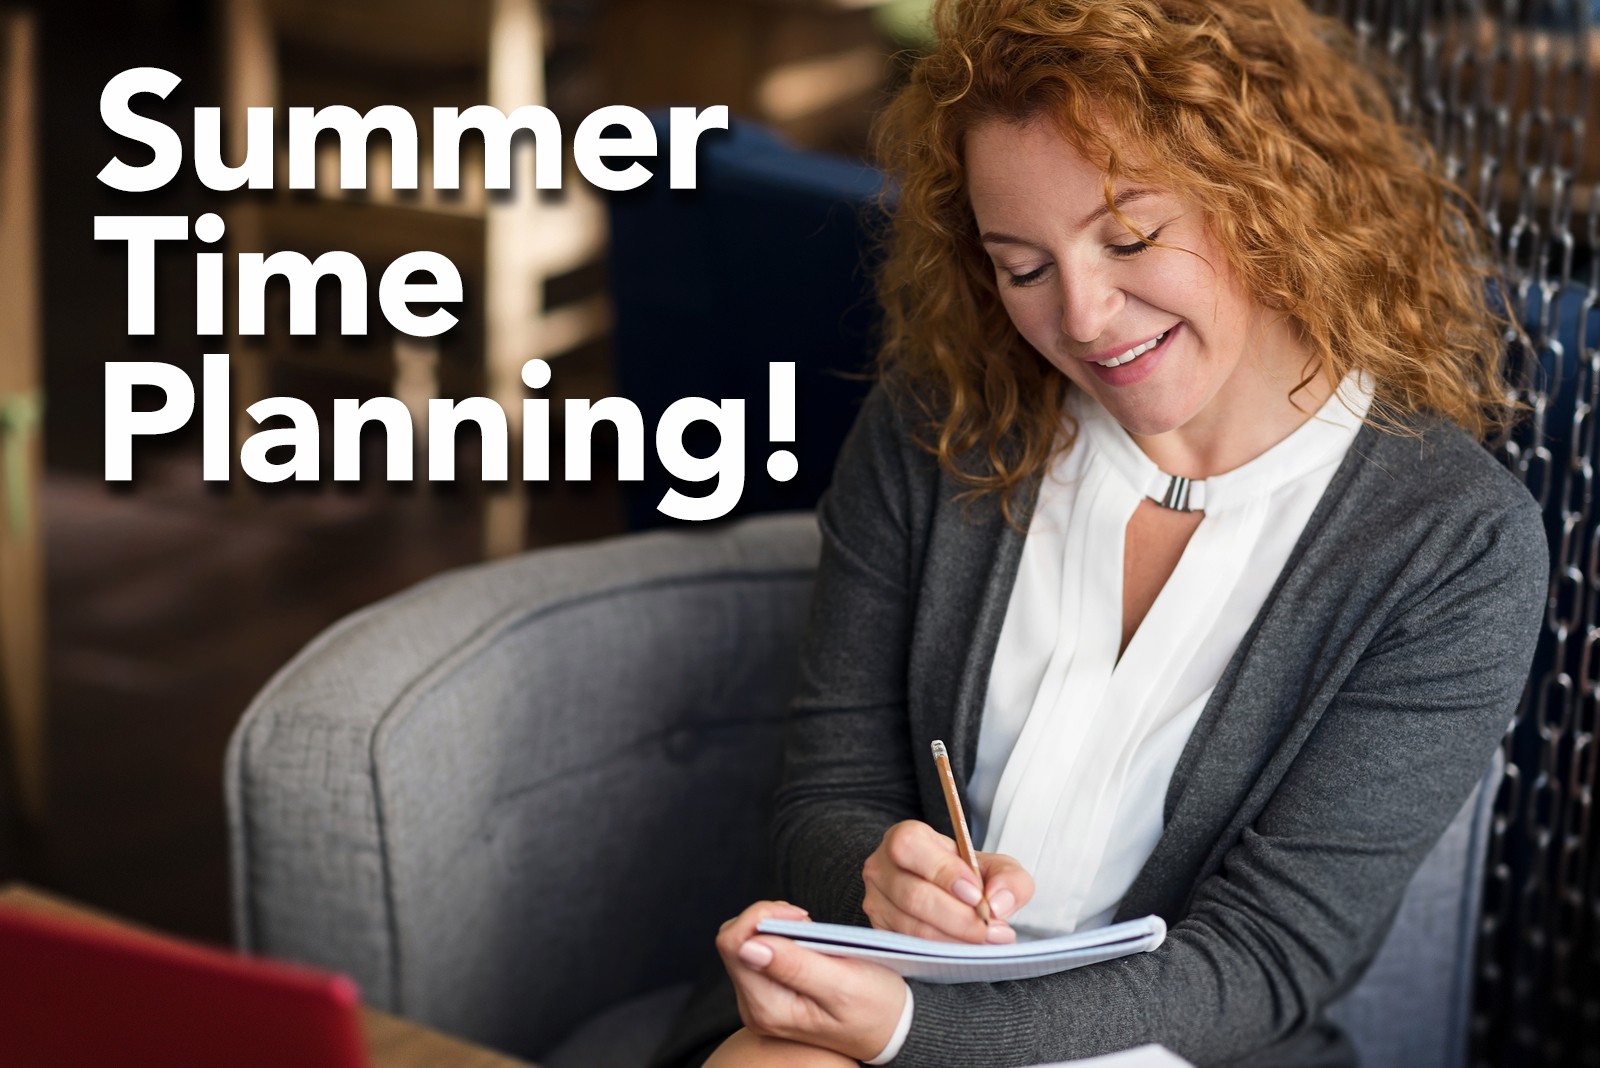 summer time planning, kids summer holidays, holiday planner, activity planning for family